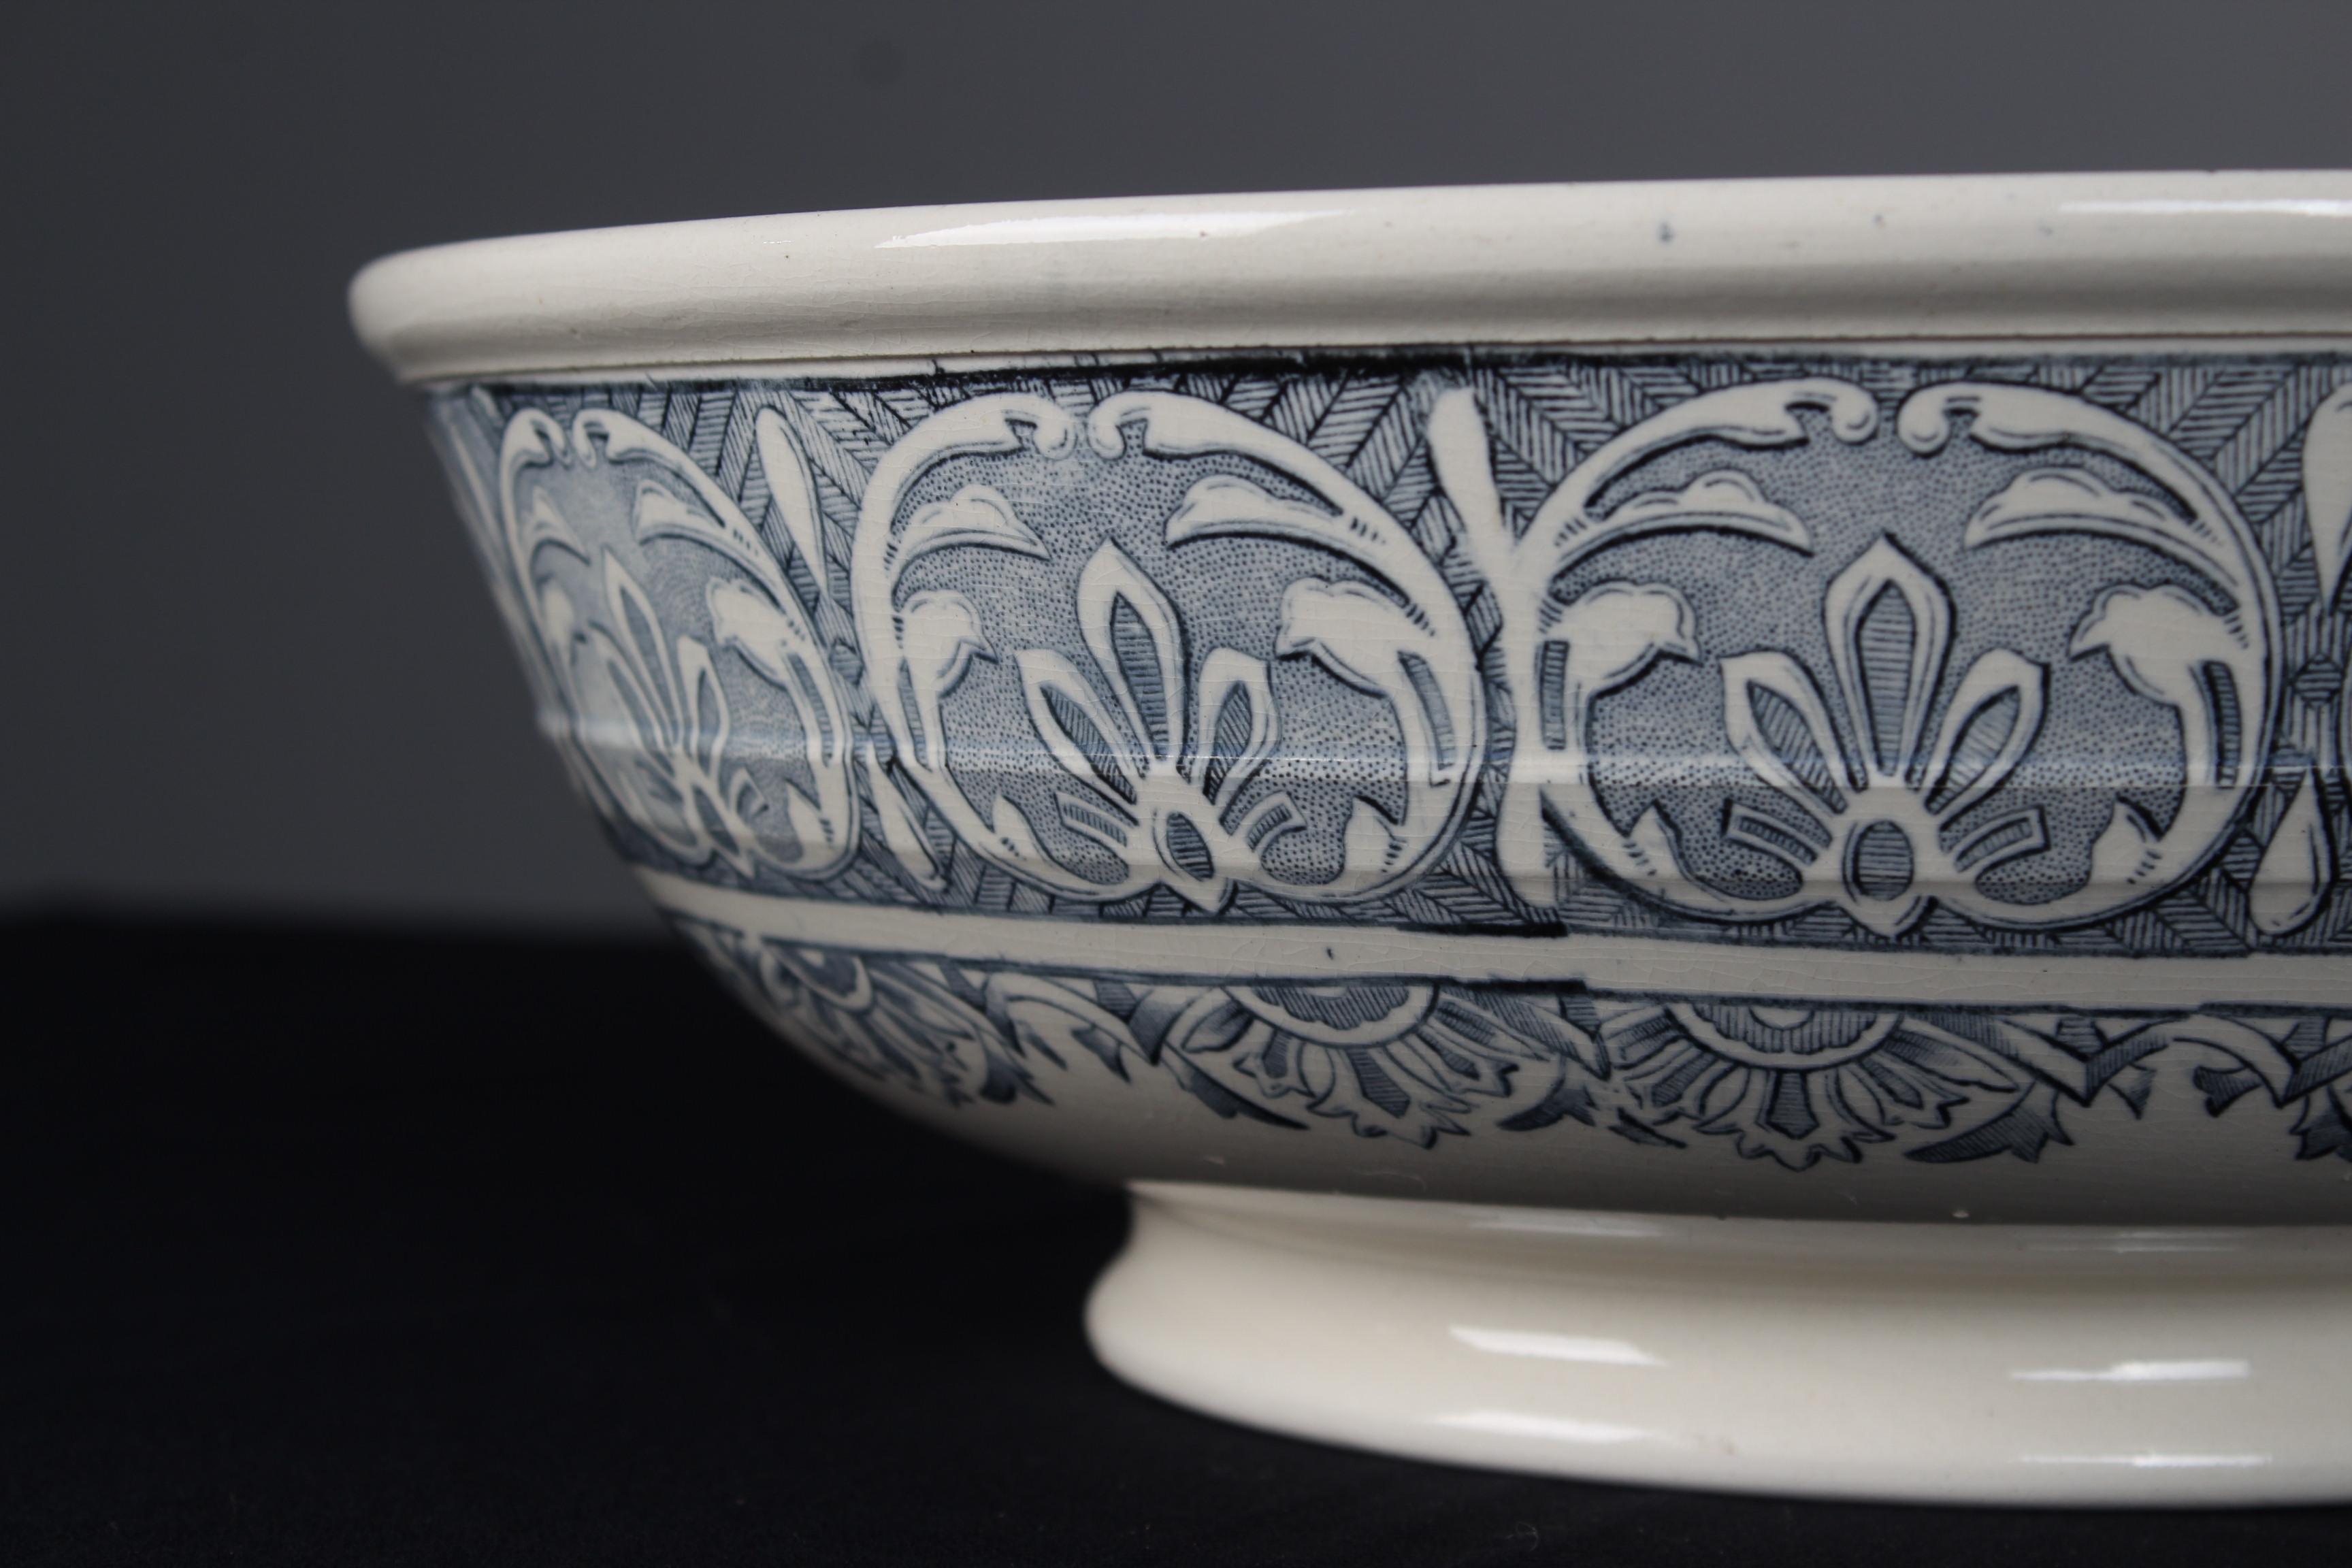 Beautiful large ceramic bowl in a moorish style, France, circa 1880.
Stamped at the bottom 